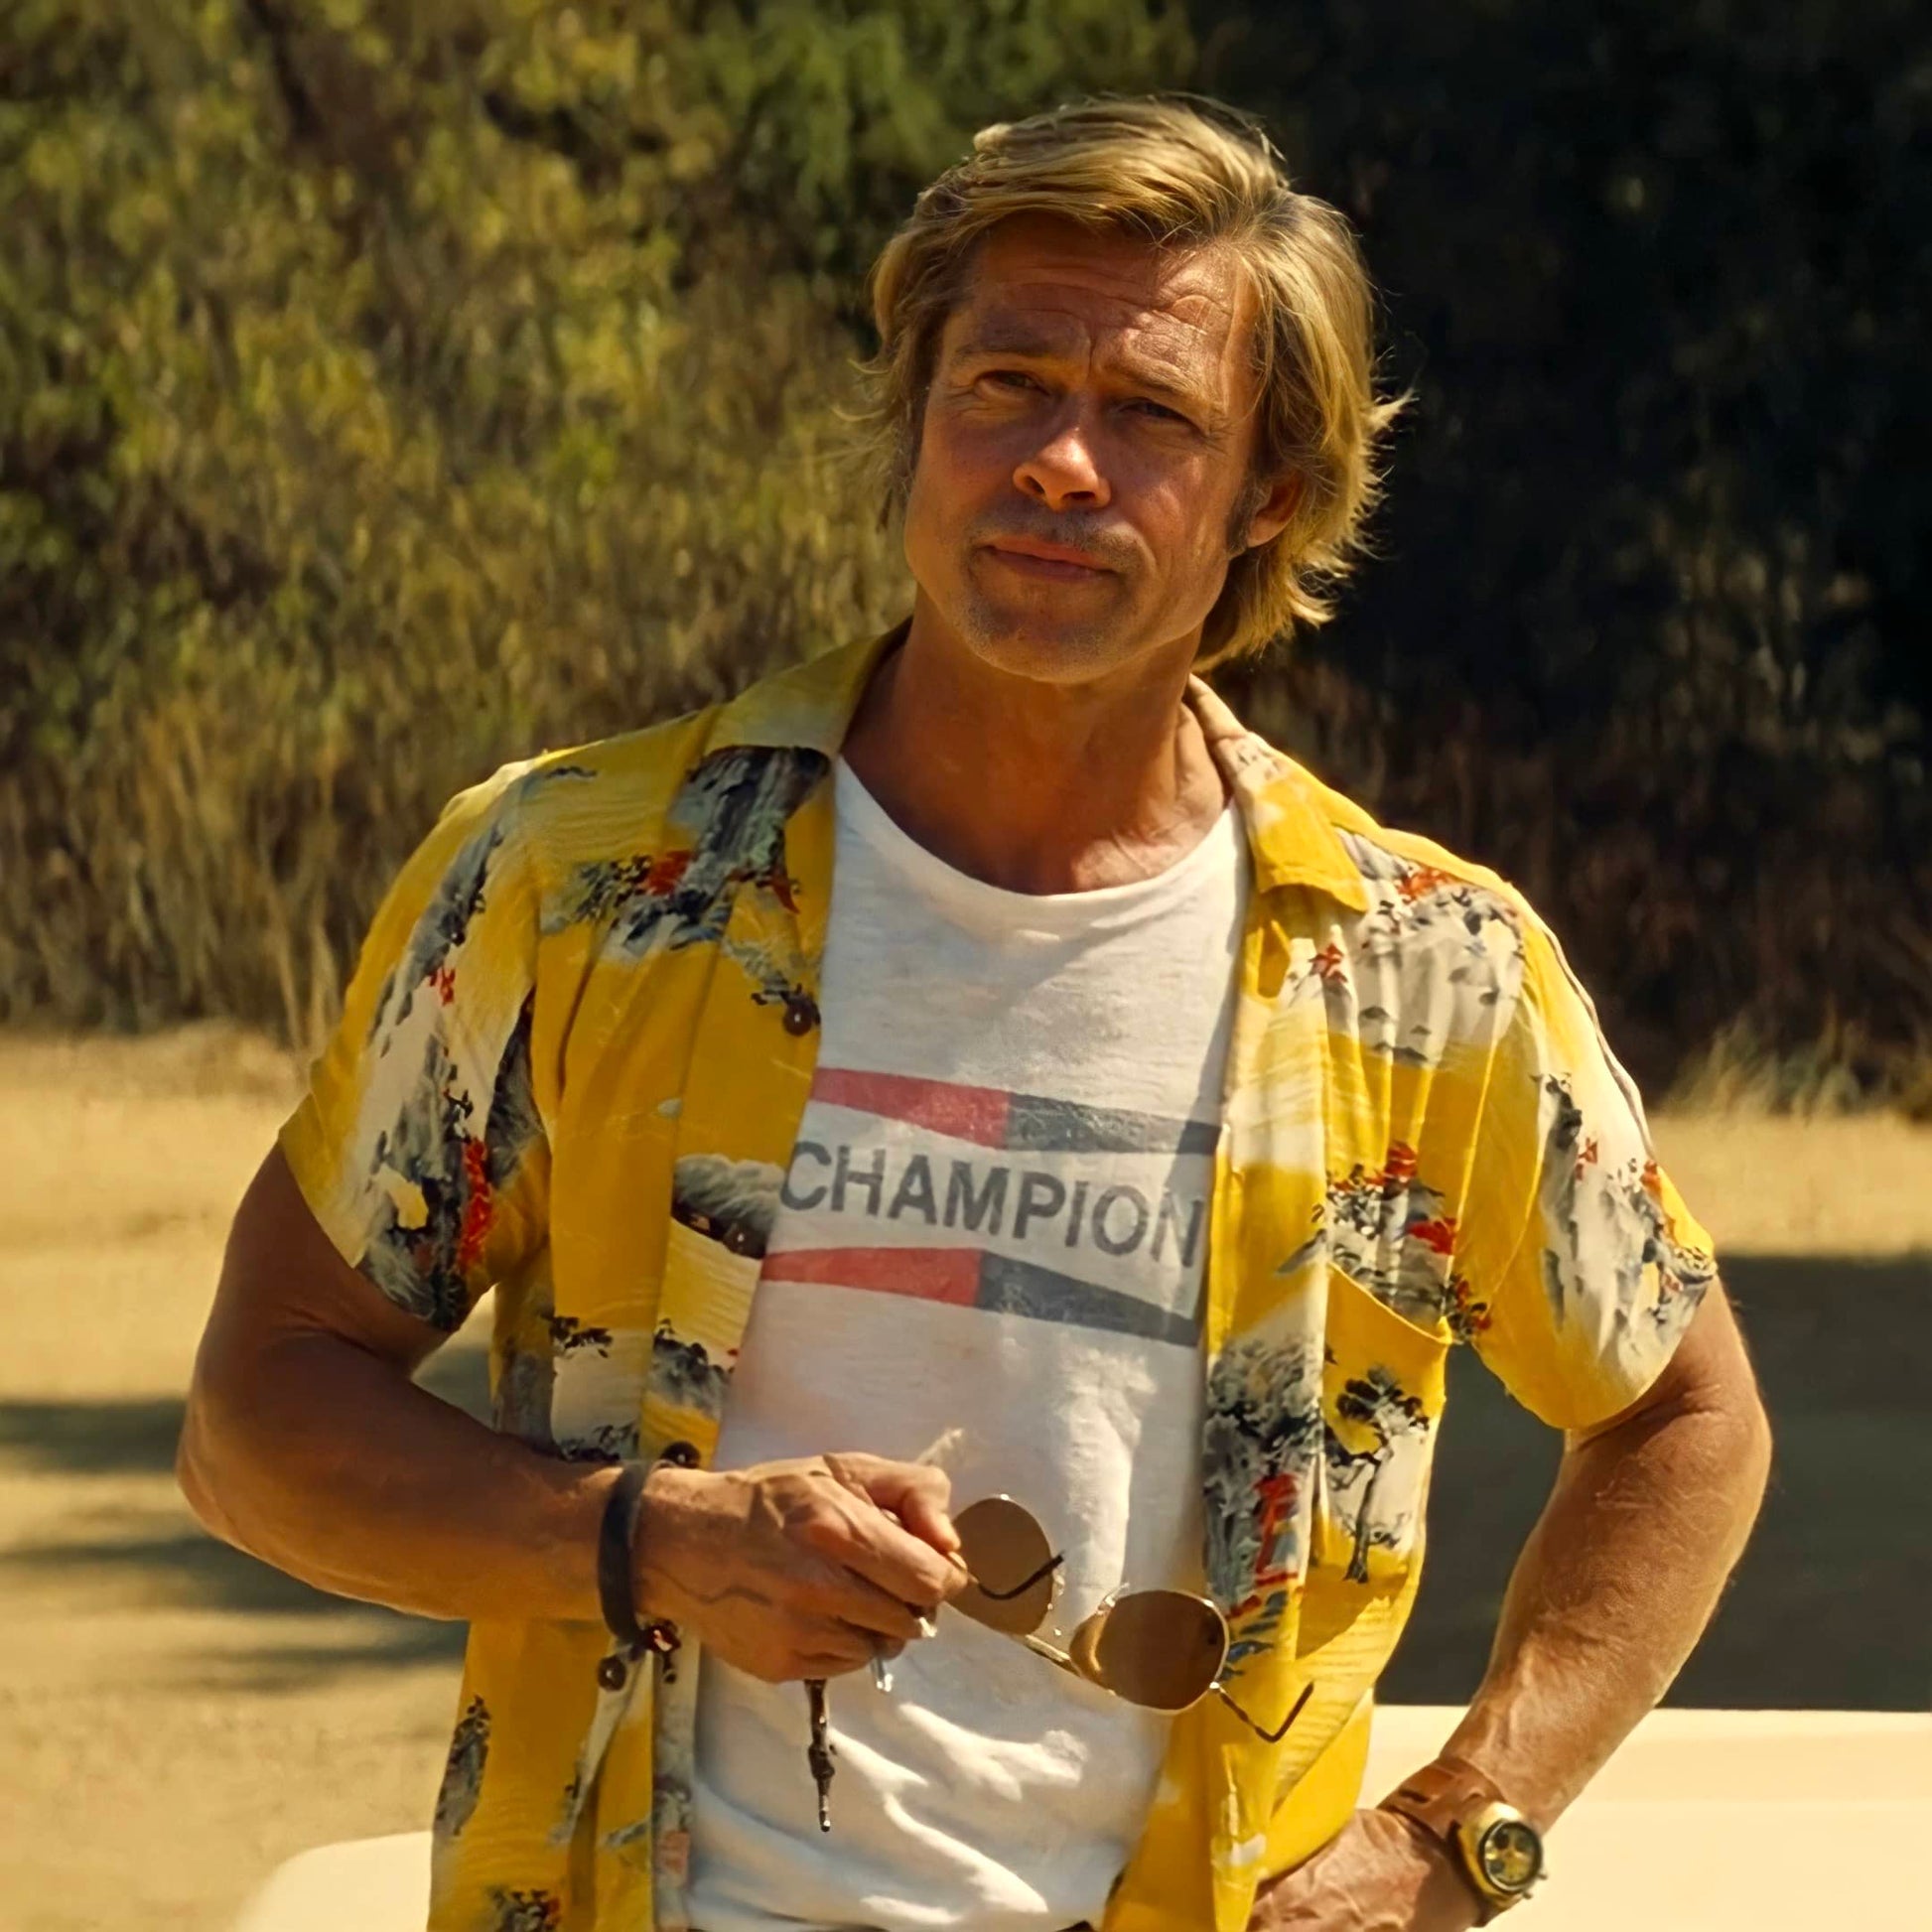 Upgrade your casual wardrobe with our exclusive Cliff Booth Champion t-shirt, perfect for fans of 'Once Upon a Time in Hollywood' and the legendary character played by Brad Pitt